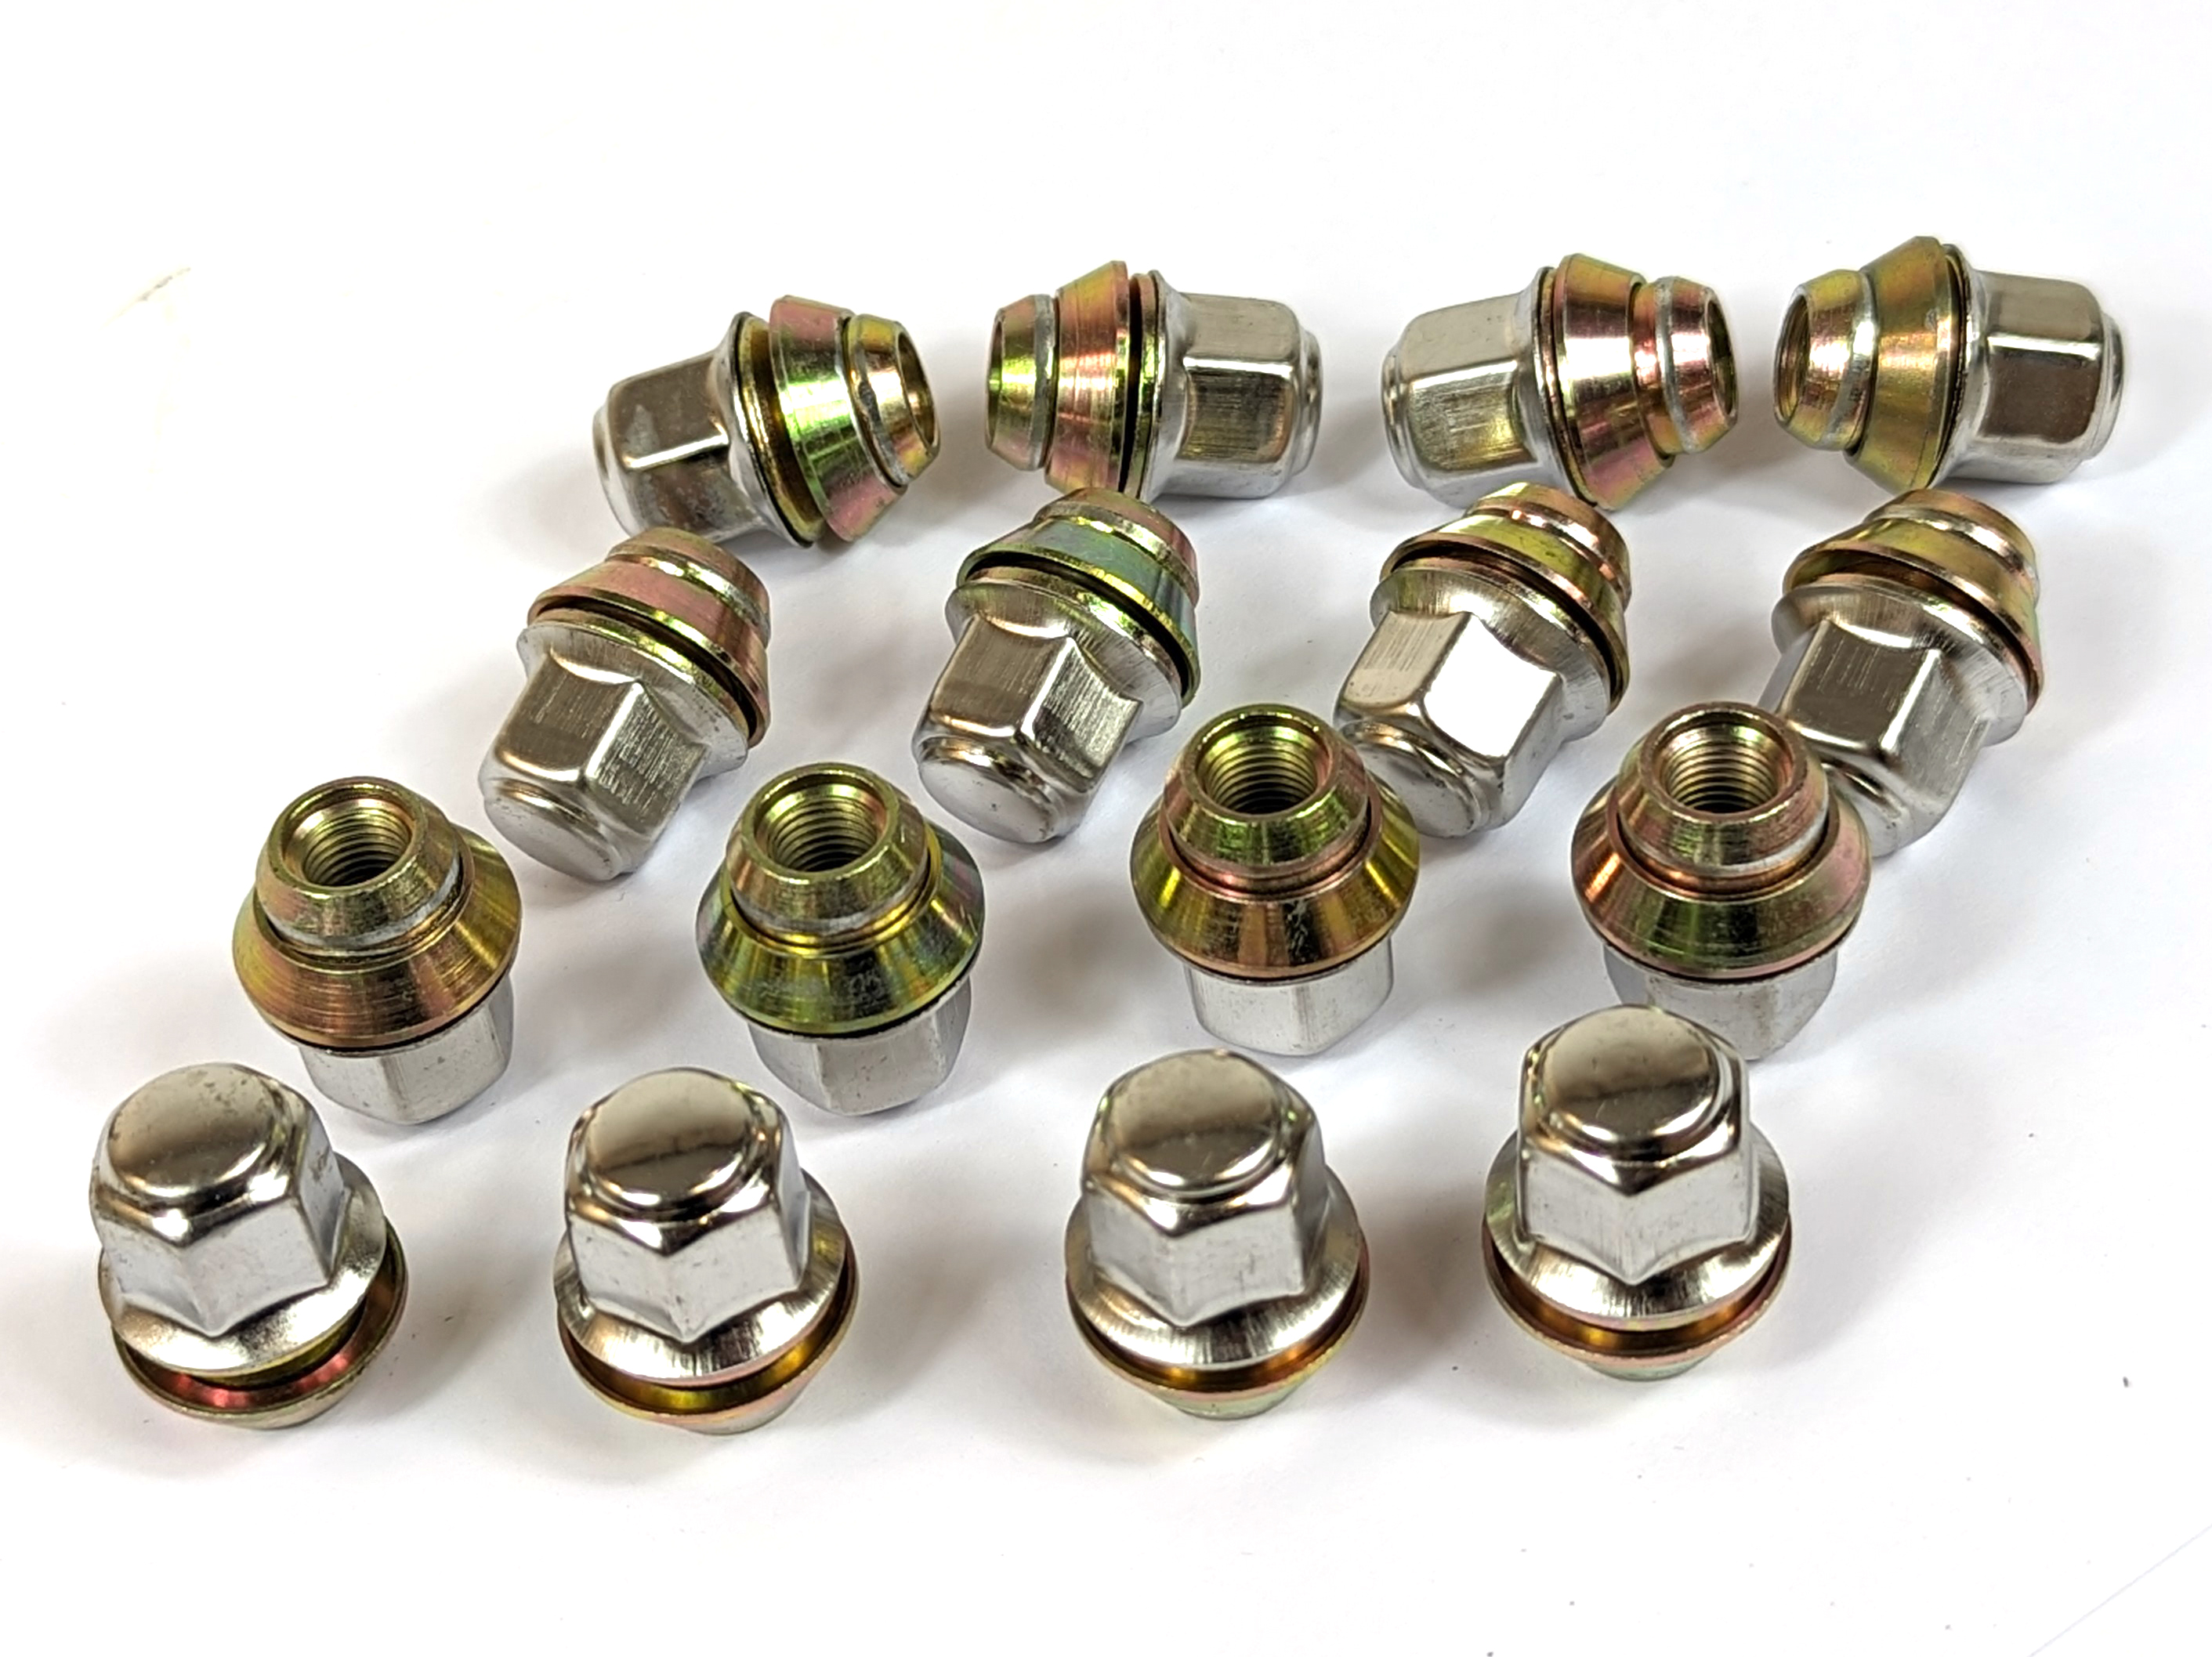 OE ORIGINAL STAINLESS STEEL COOPER NUT / A108X